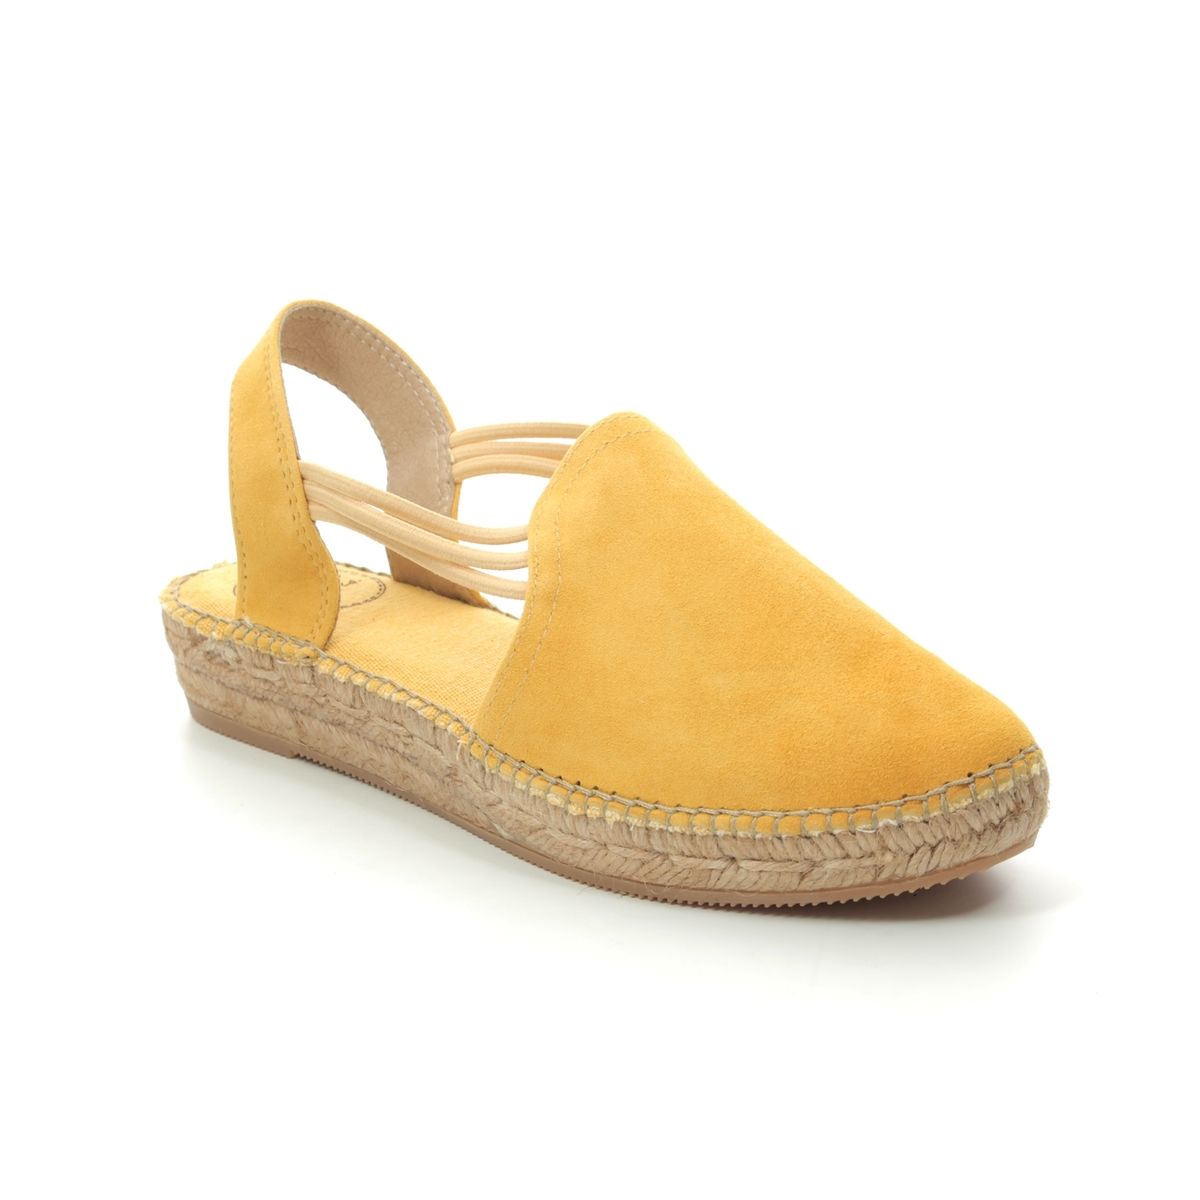 Toni Pons Nuria In Yellow Suede 0110-08 In Size 39 In Plain Yellow Suede